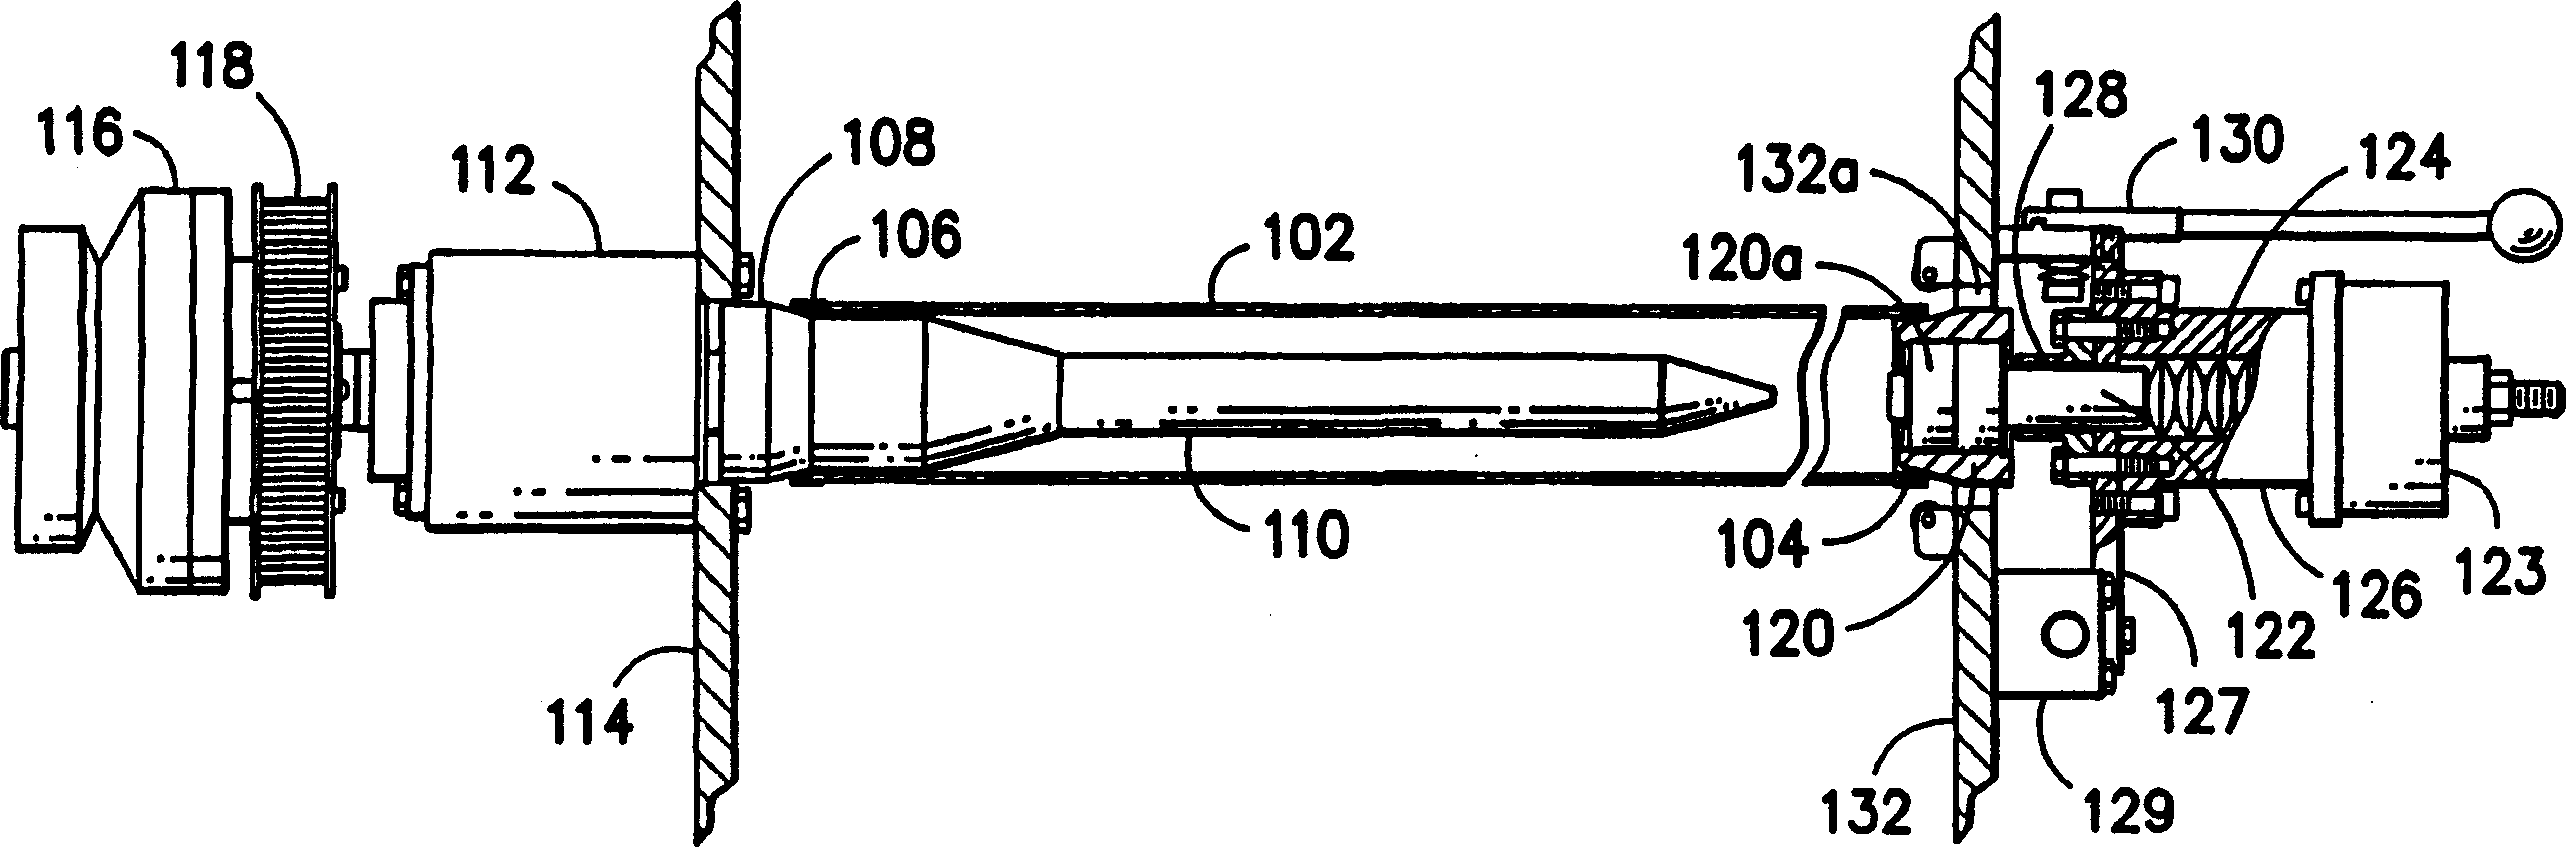 Fabric treatment apparatus comprising easily removable treatment tubes